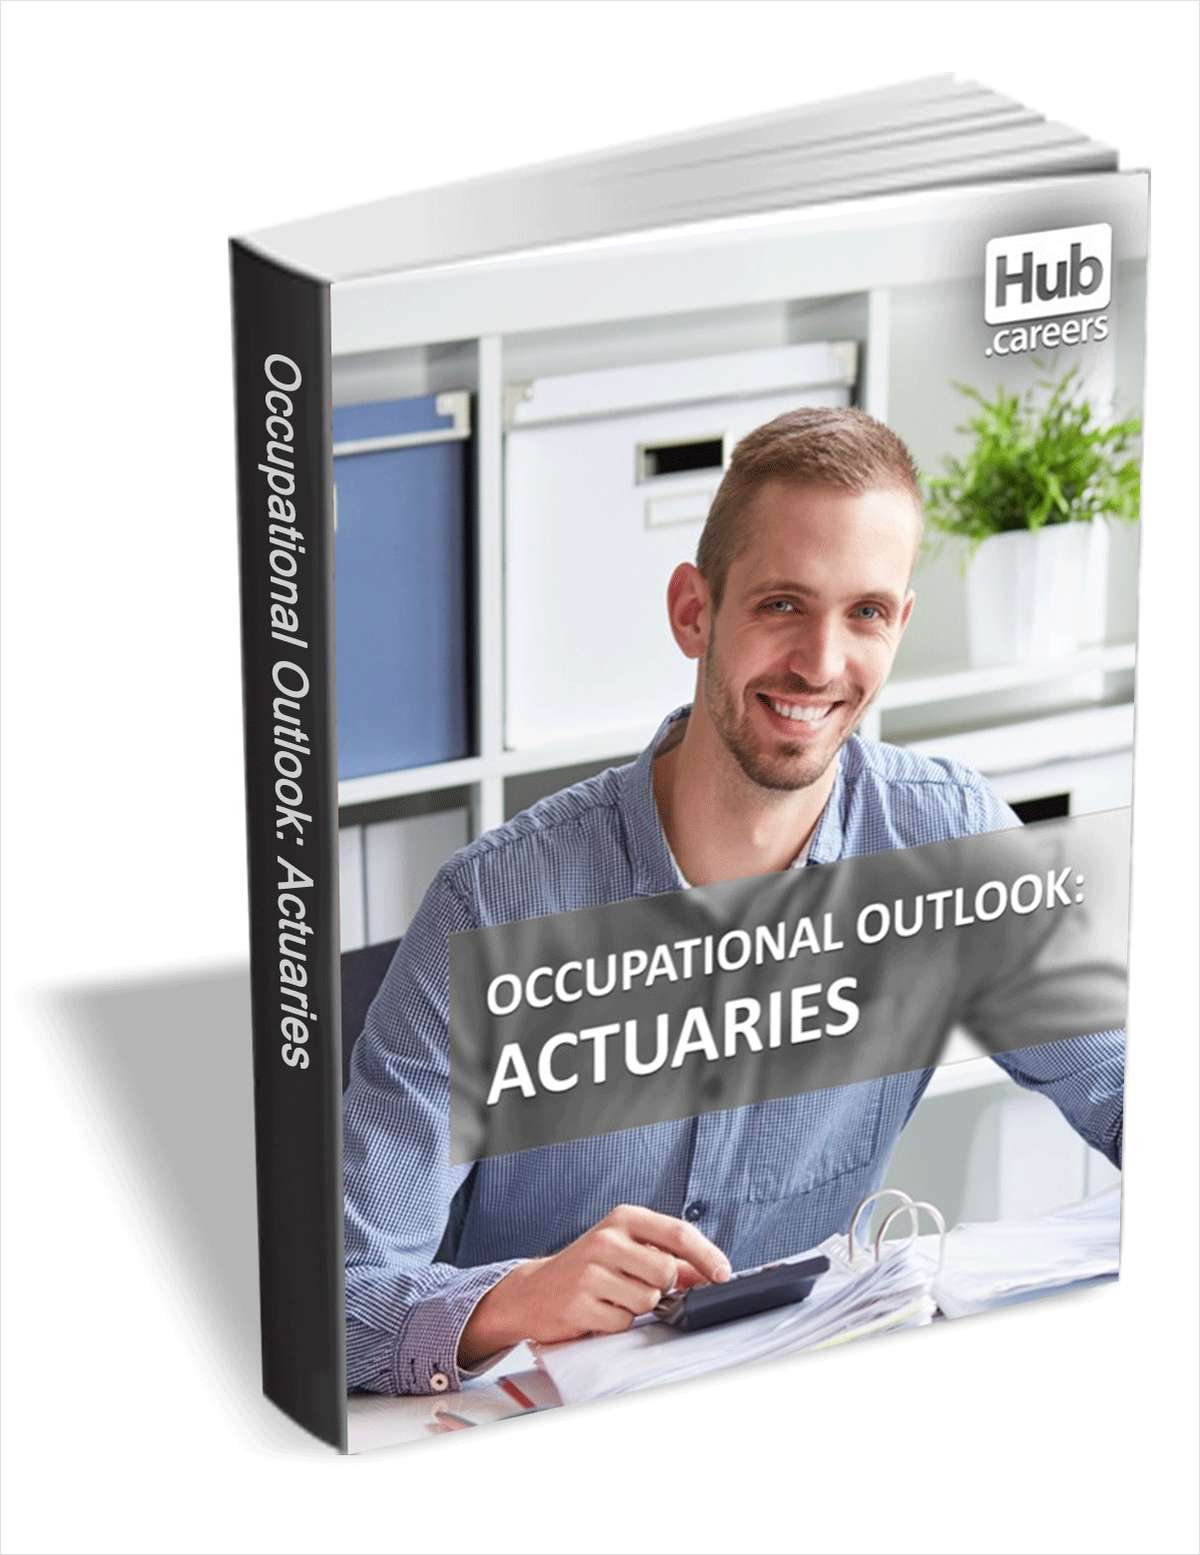 Actuaries - Occupational Outlook